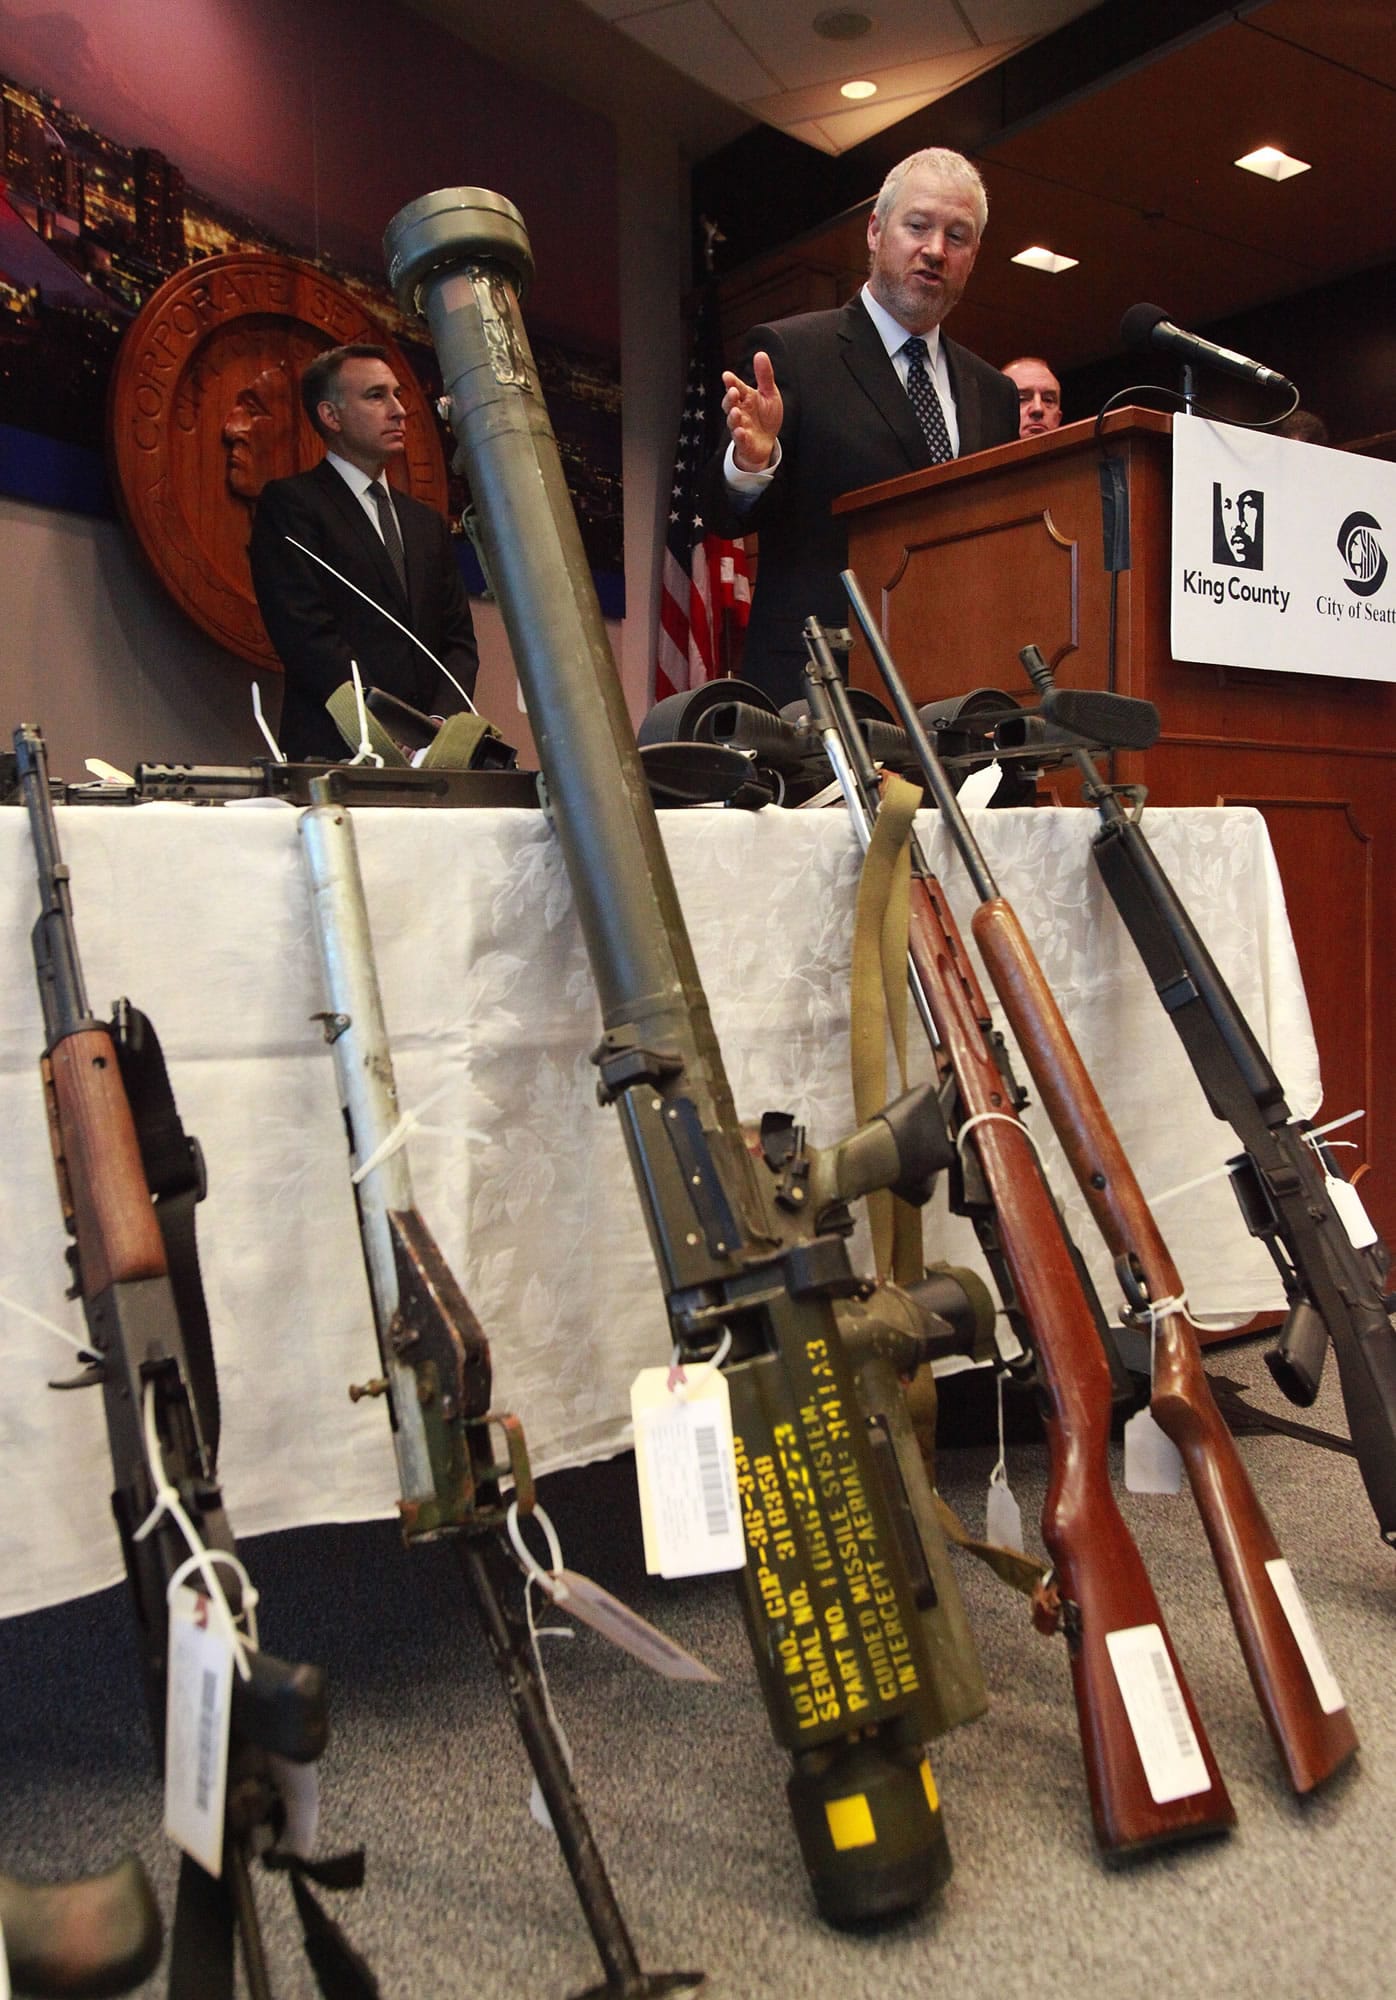 Seattle Mayor Mike McGinn, right, addresses a news conference Monday in Seattle. A missile launcher, front center, was found during a weapons buyback event Saturday.